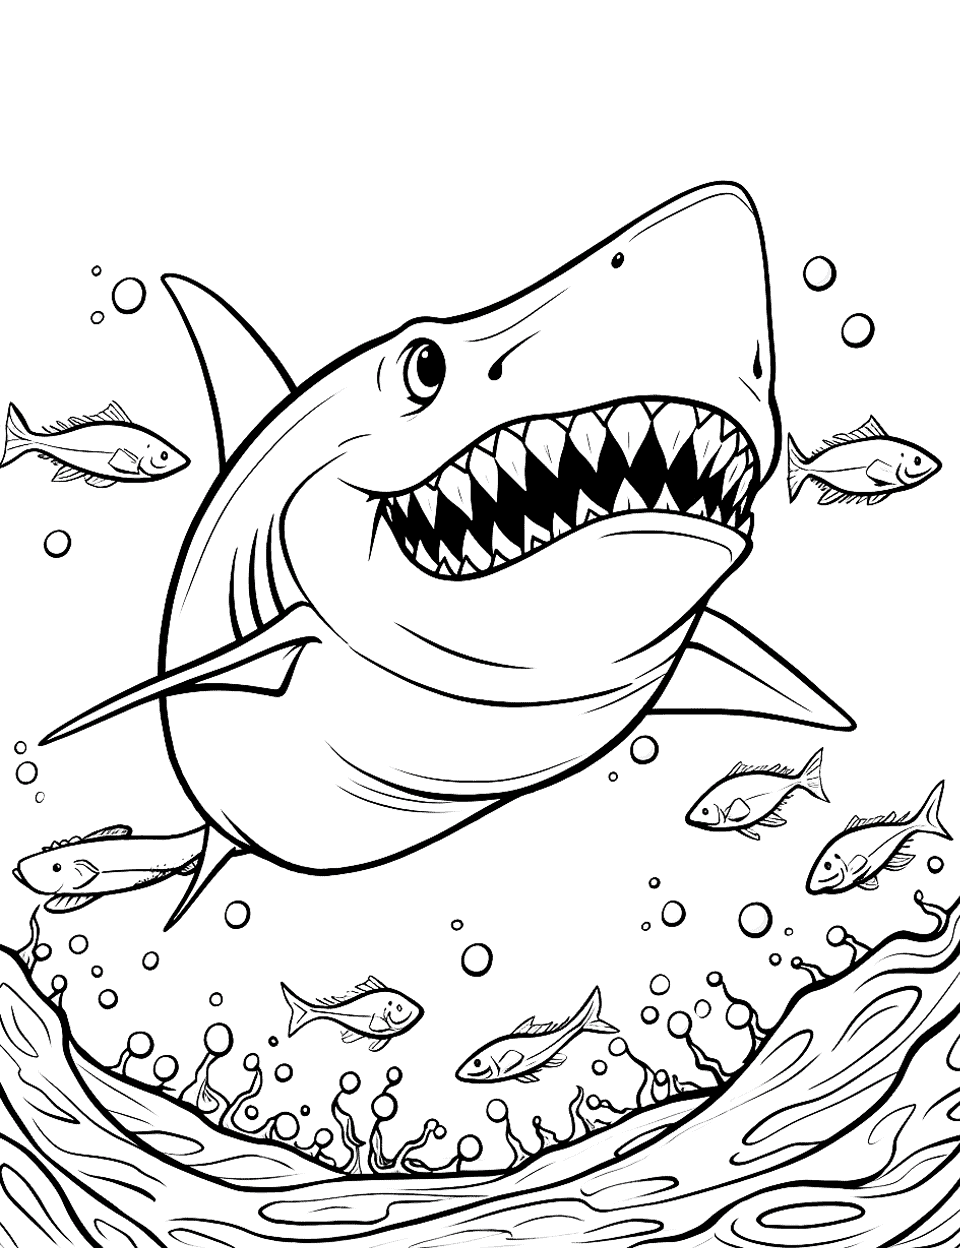 Shark coloring pages free printable sheets